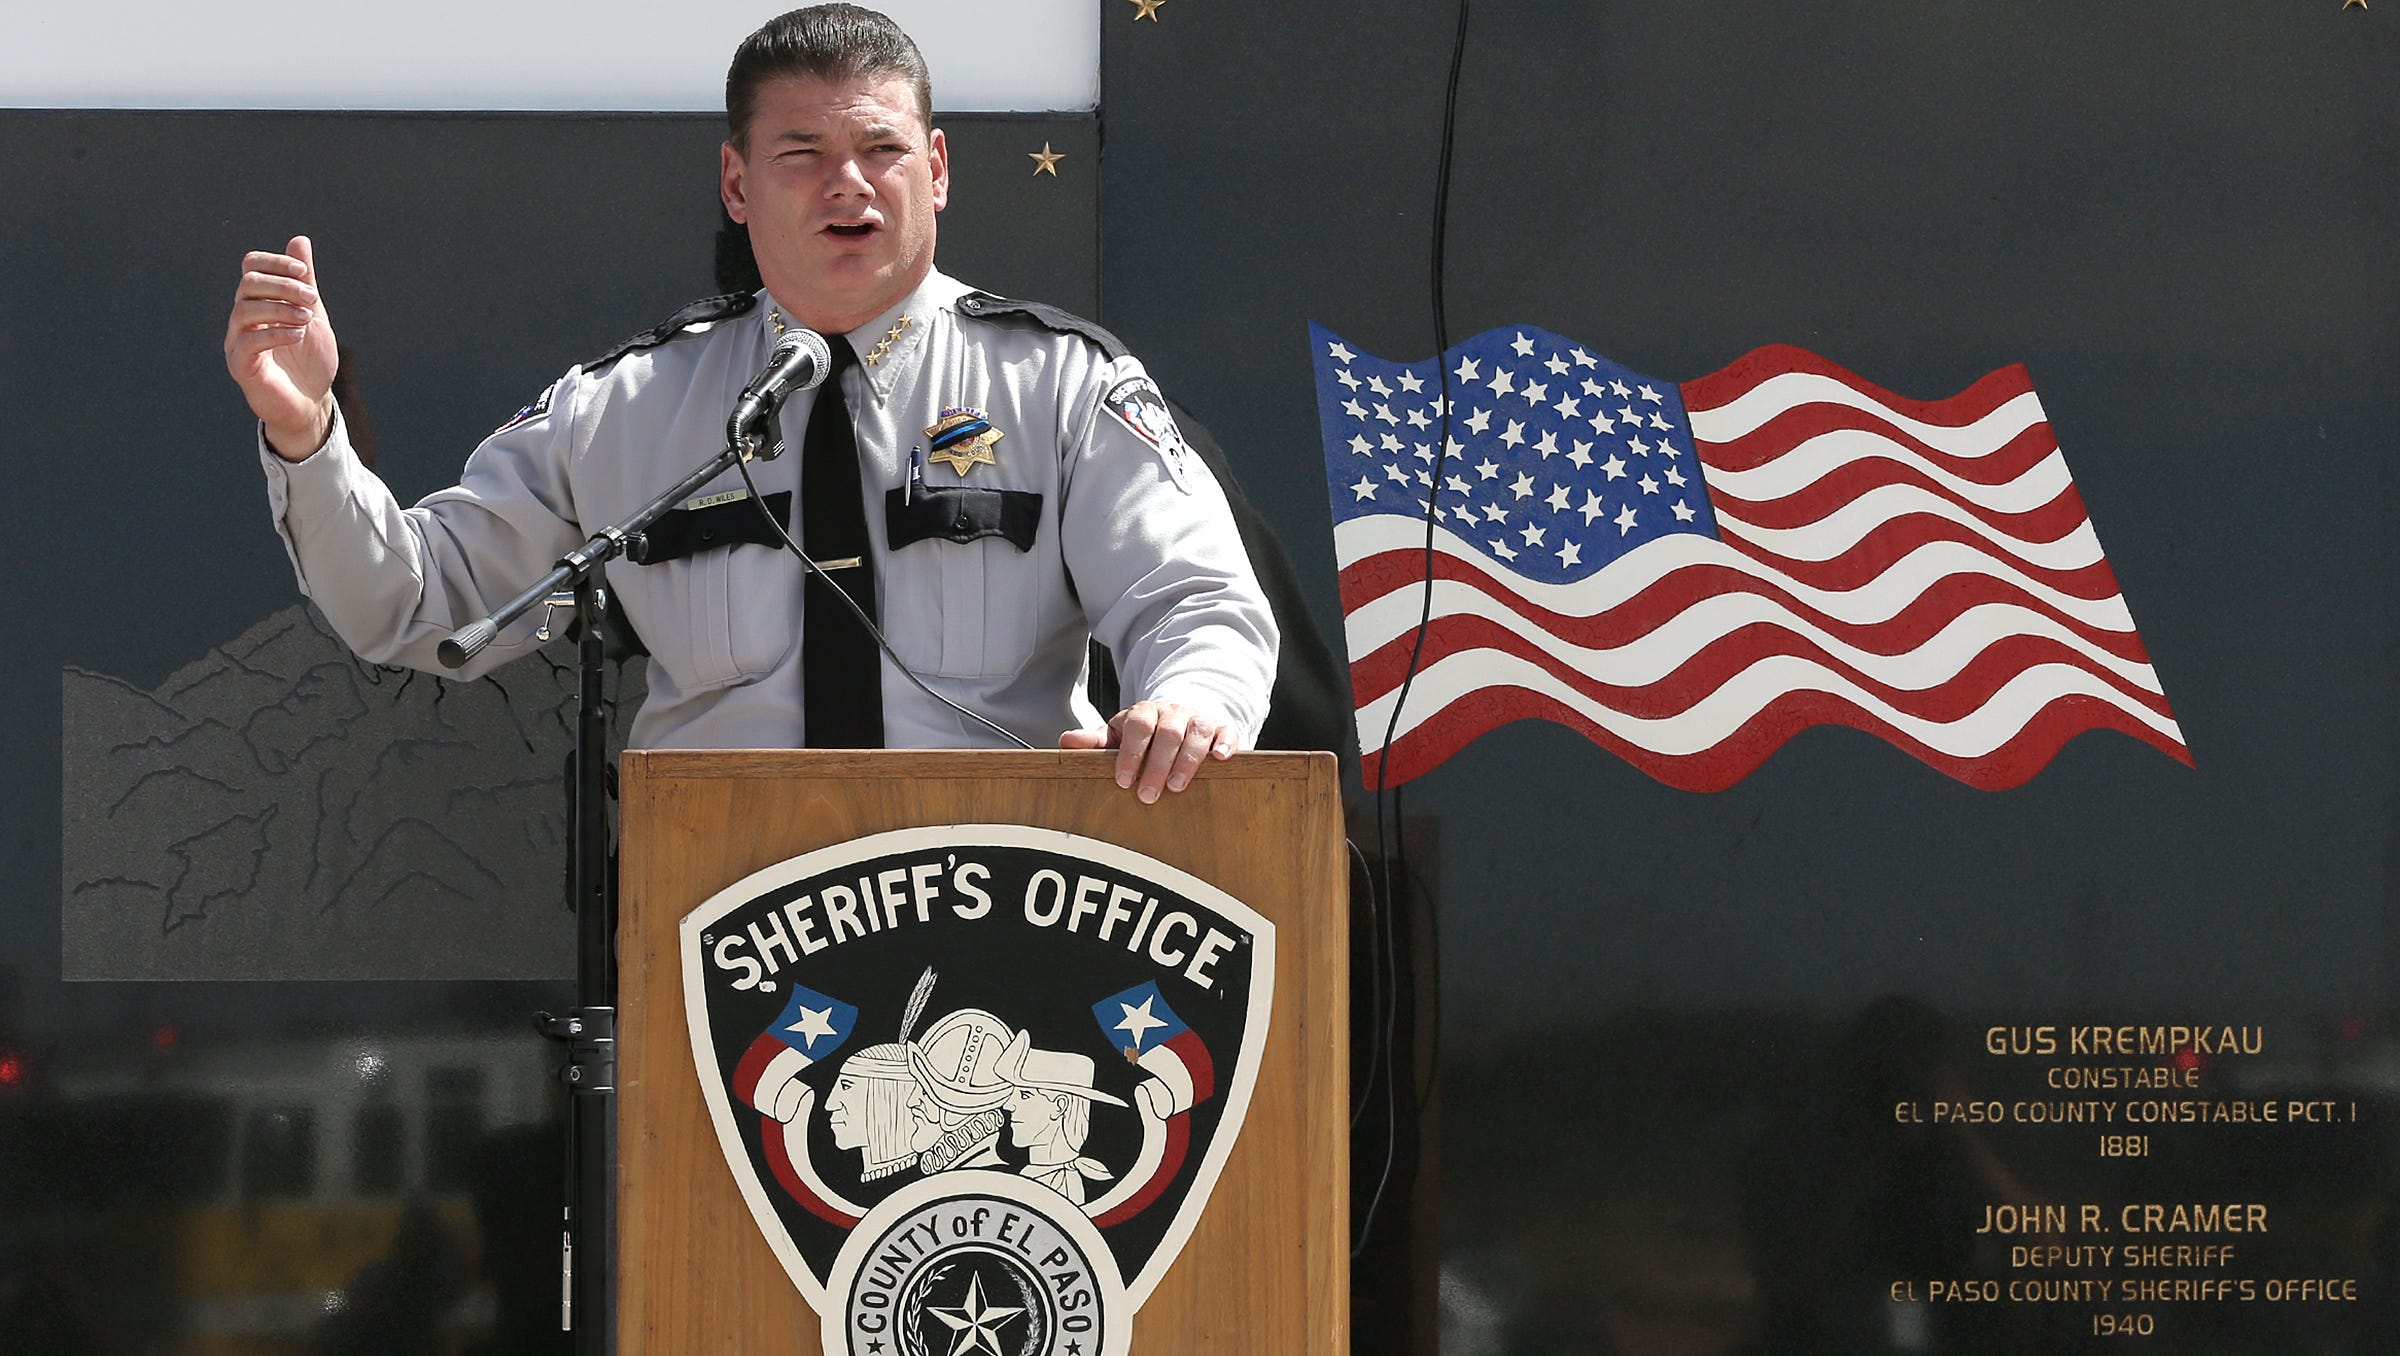 Defunding' the Sheriff's Office inappropriate: Richard Wiles